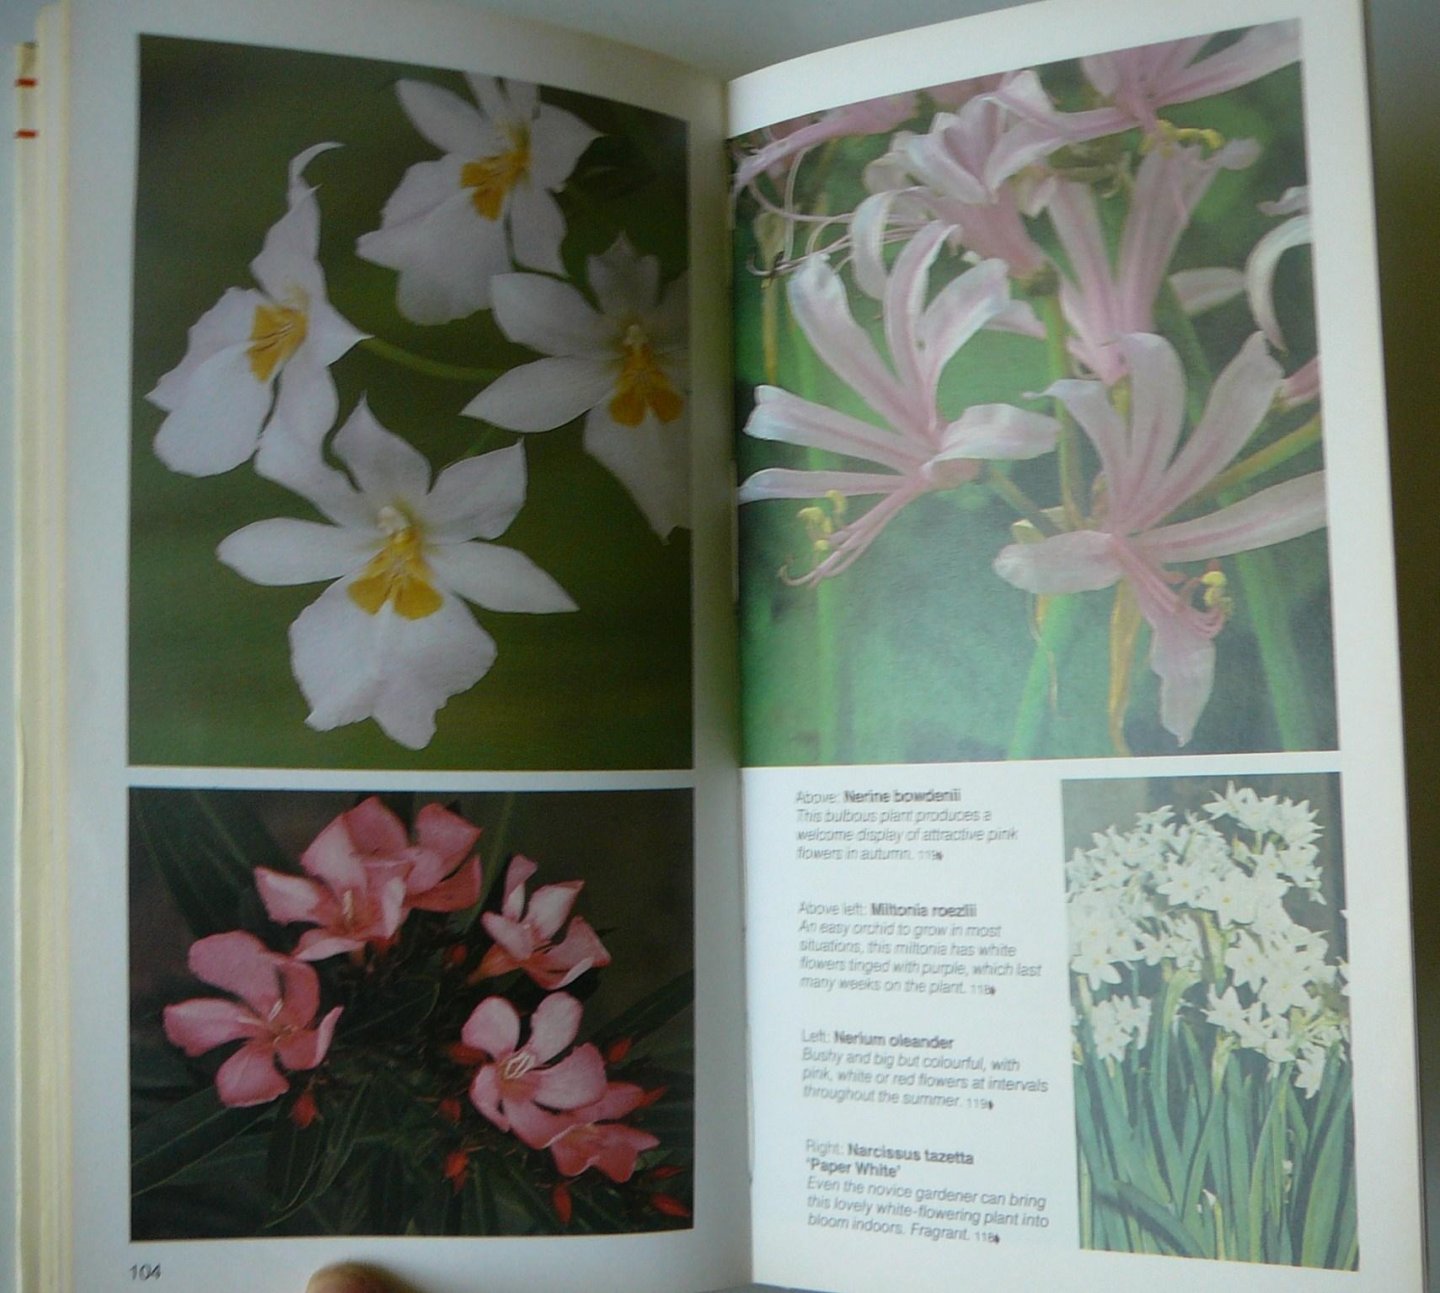 Davidson, William - An illustrated guide to Flowering Houseplants